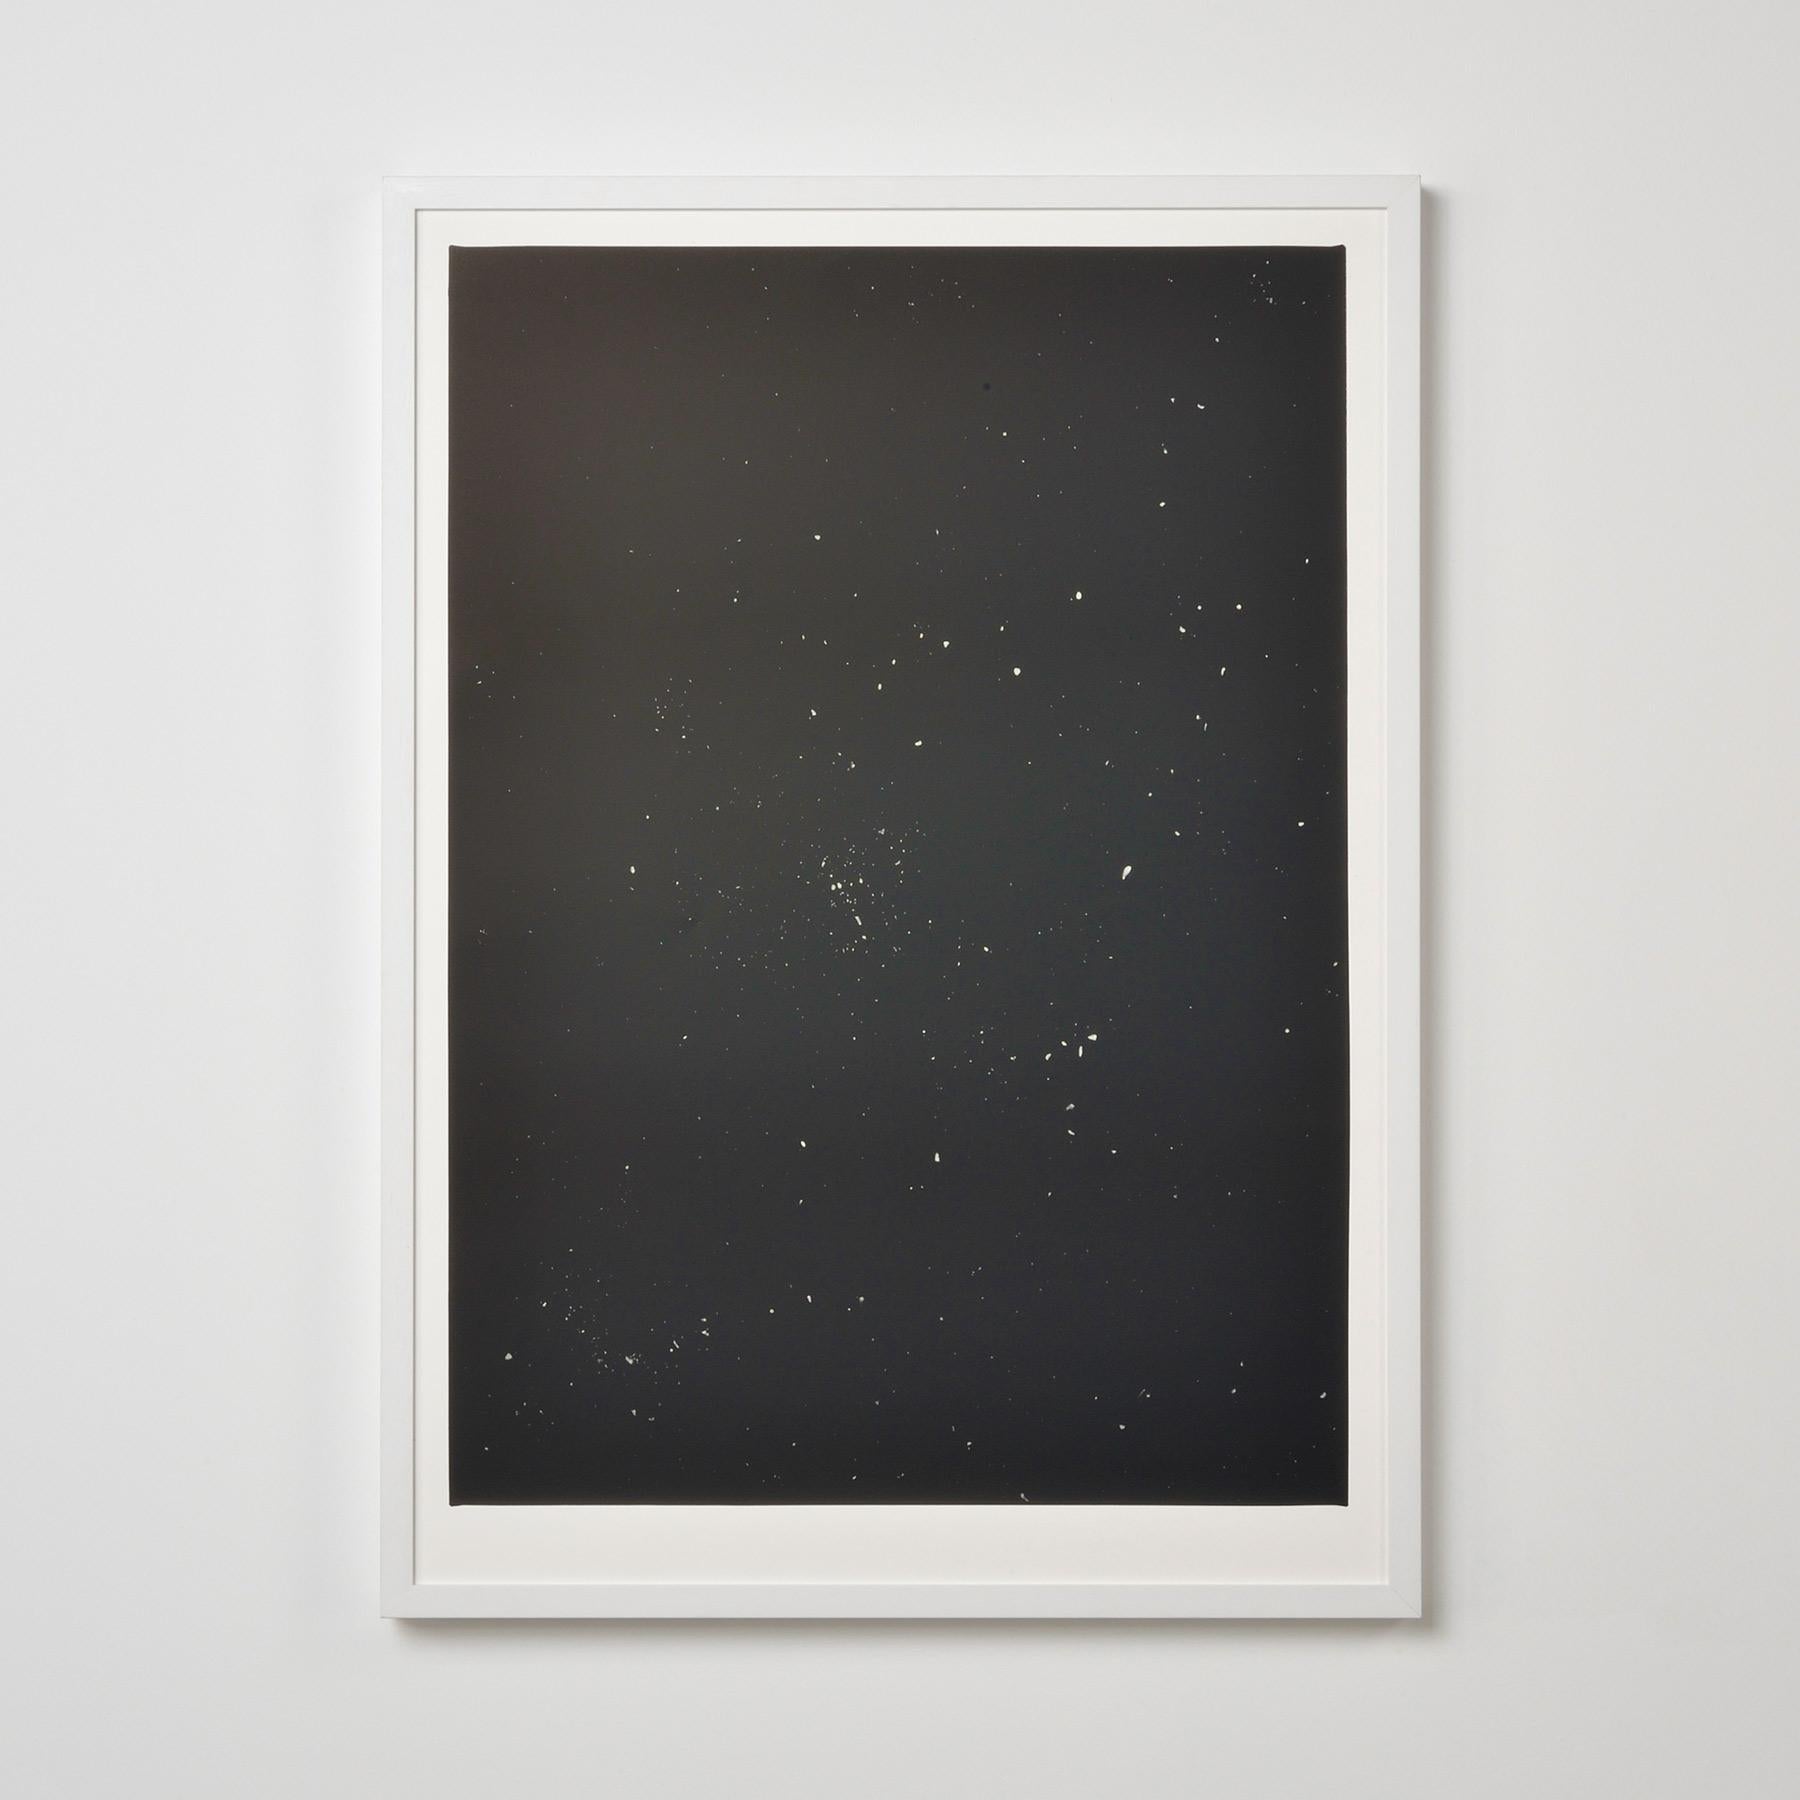 Stars - Contemporary, 21st Century, Silkscreen, Limited Edition, Skyscapes - Gray Landscape Print by Ugo Rondinone